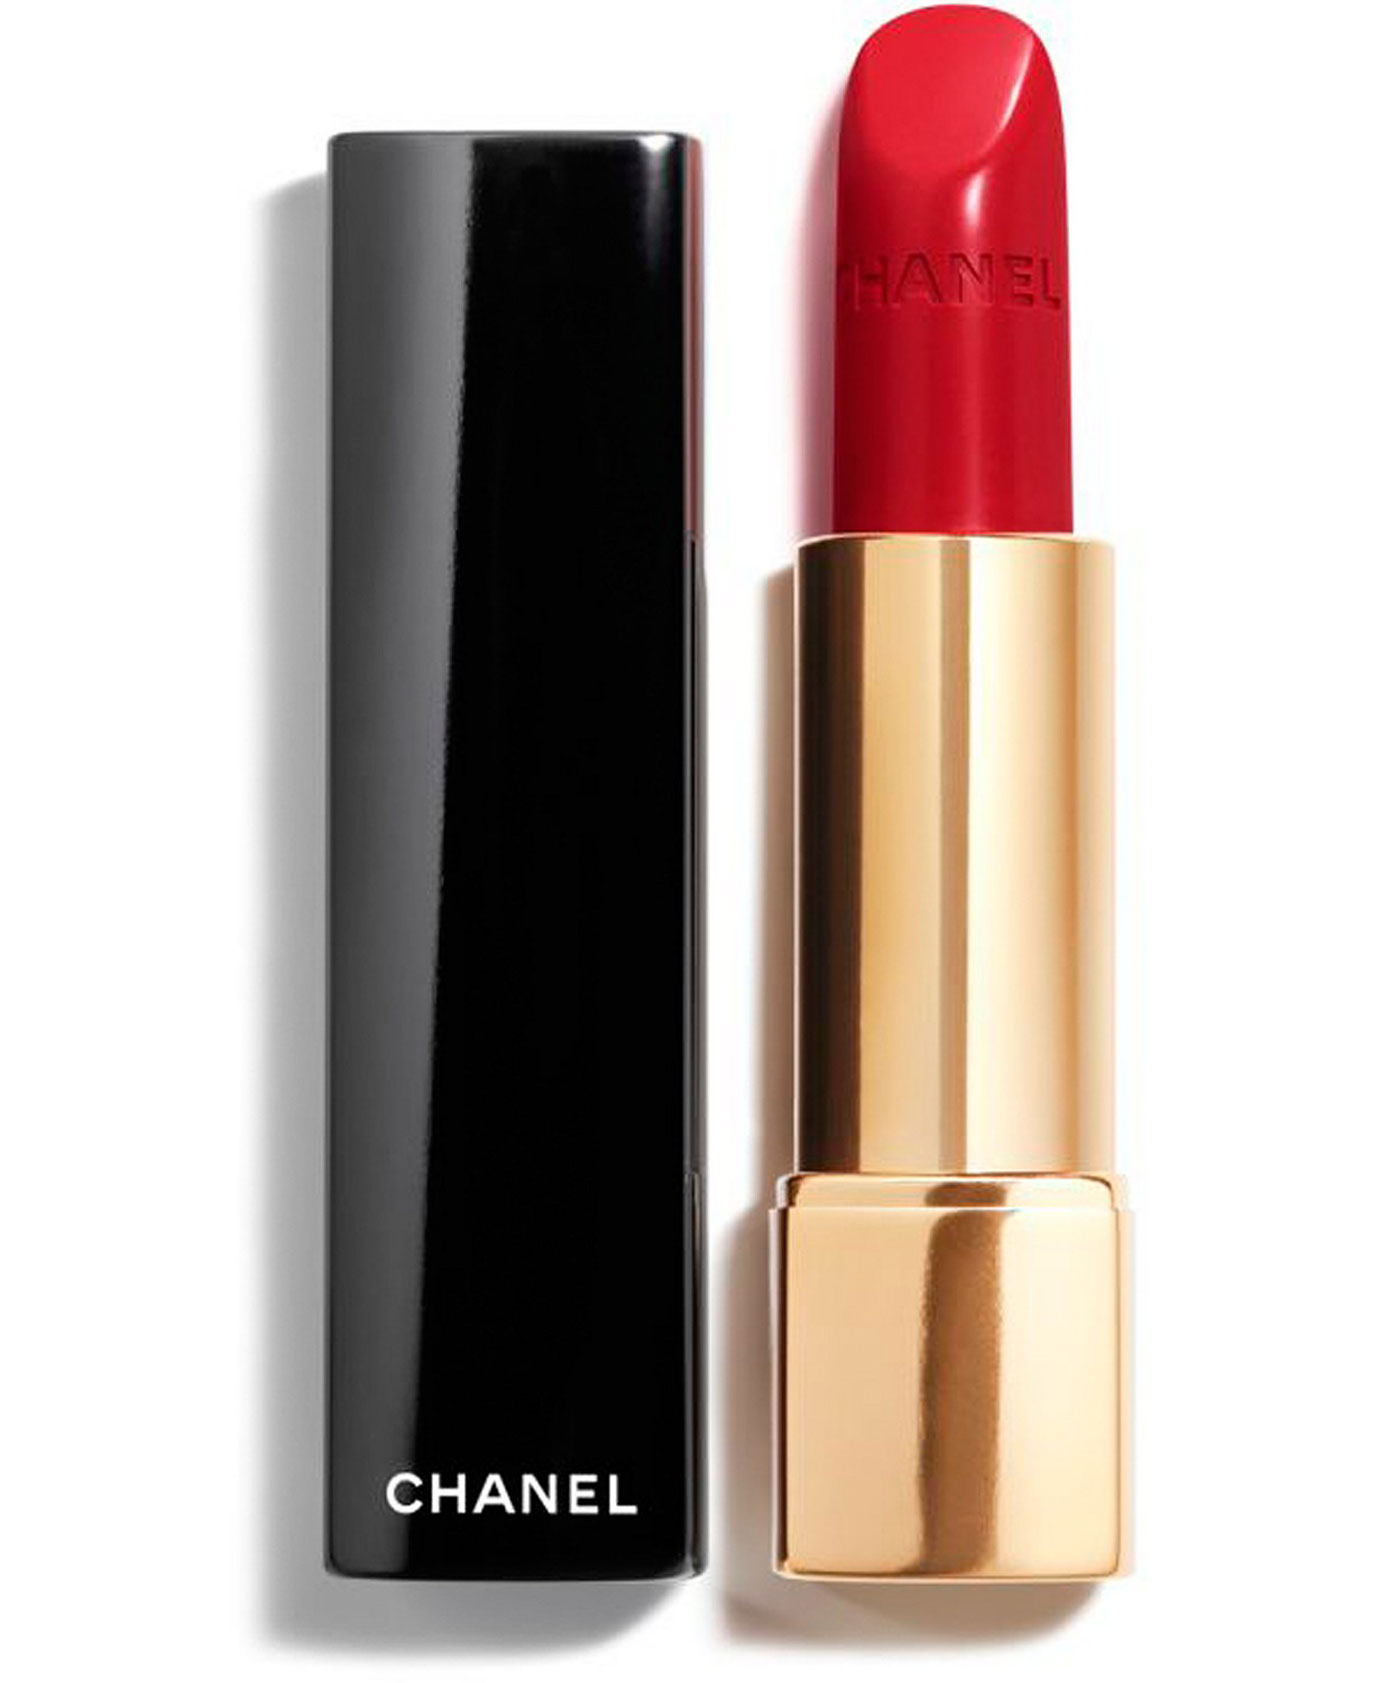 Chanel lipgloss Spark This color looks amazing on everyone